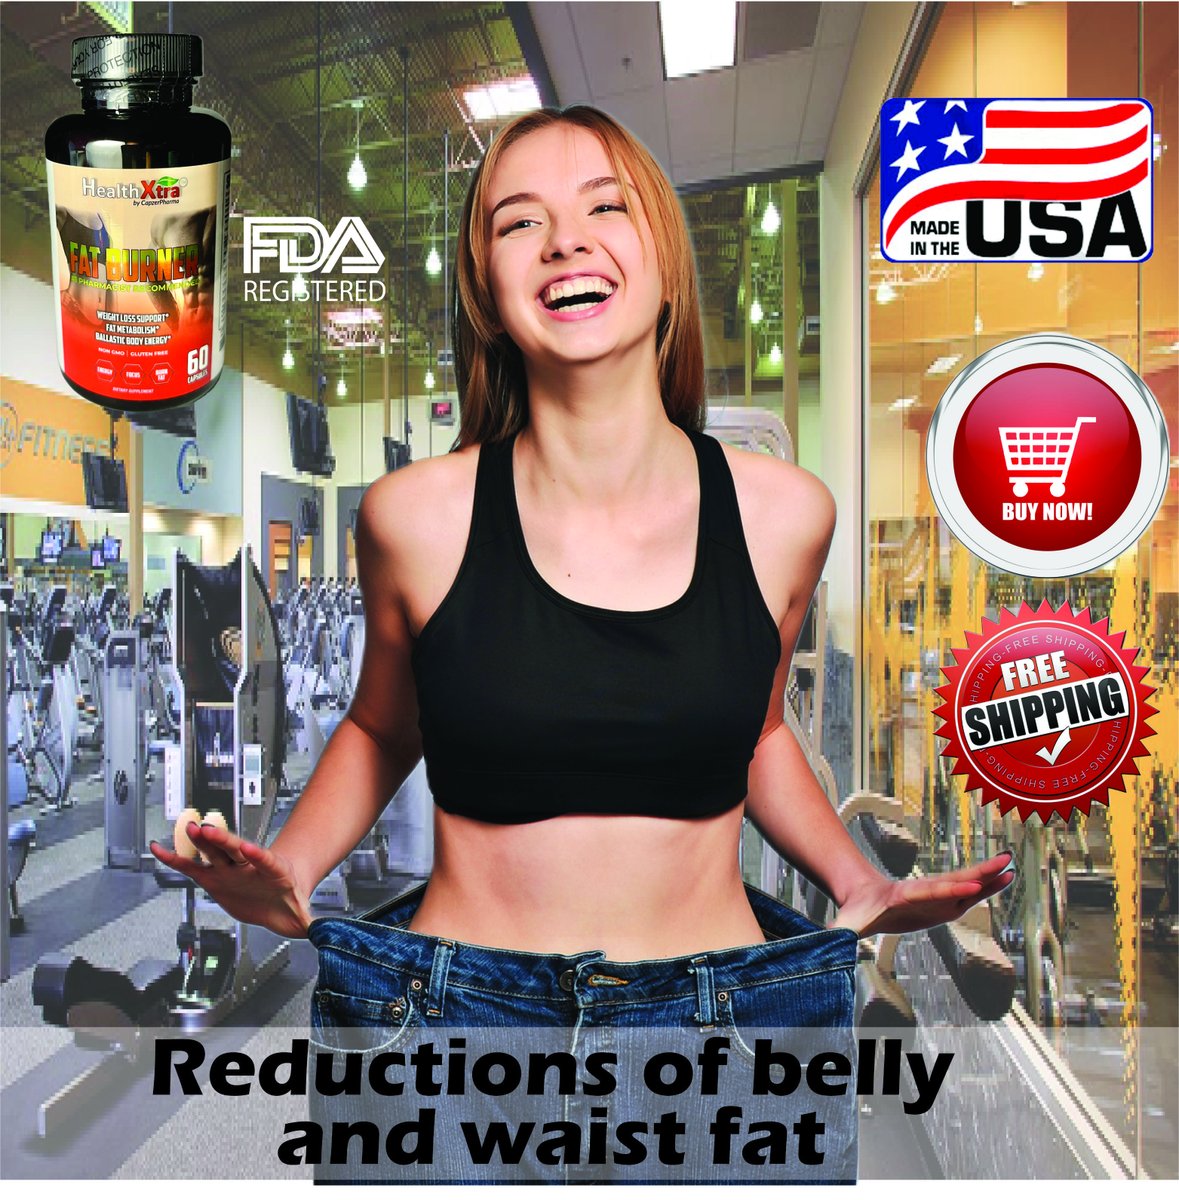 Browse our collection: healthxtra.net
Our products are available on ebay: ebay.com/str/healthxtra…

#fatloss #fatburner #fatburning #fatburningexercises #weightloss #weightlosstips #weightlossjourney #weightlosstransformation #bloatingrelief #bloatingremedy #bloating